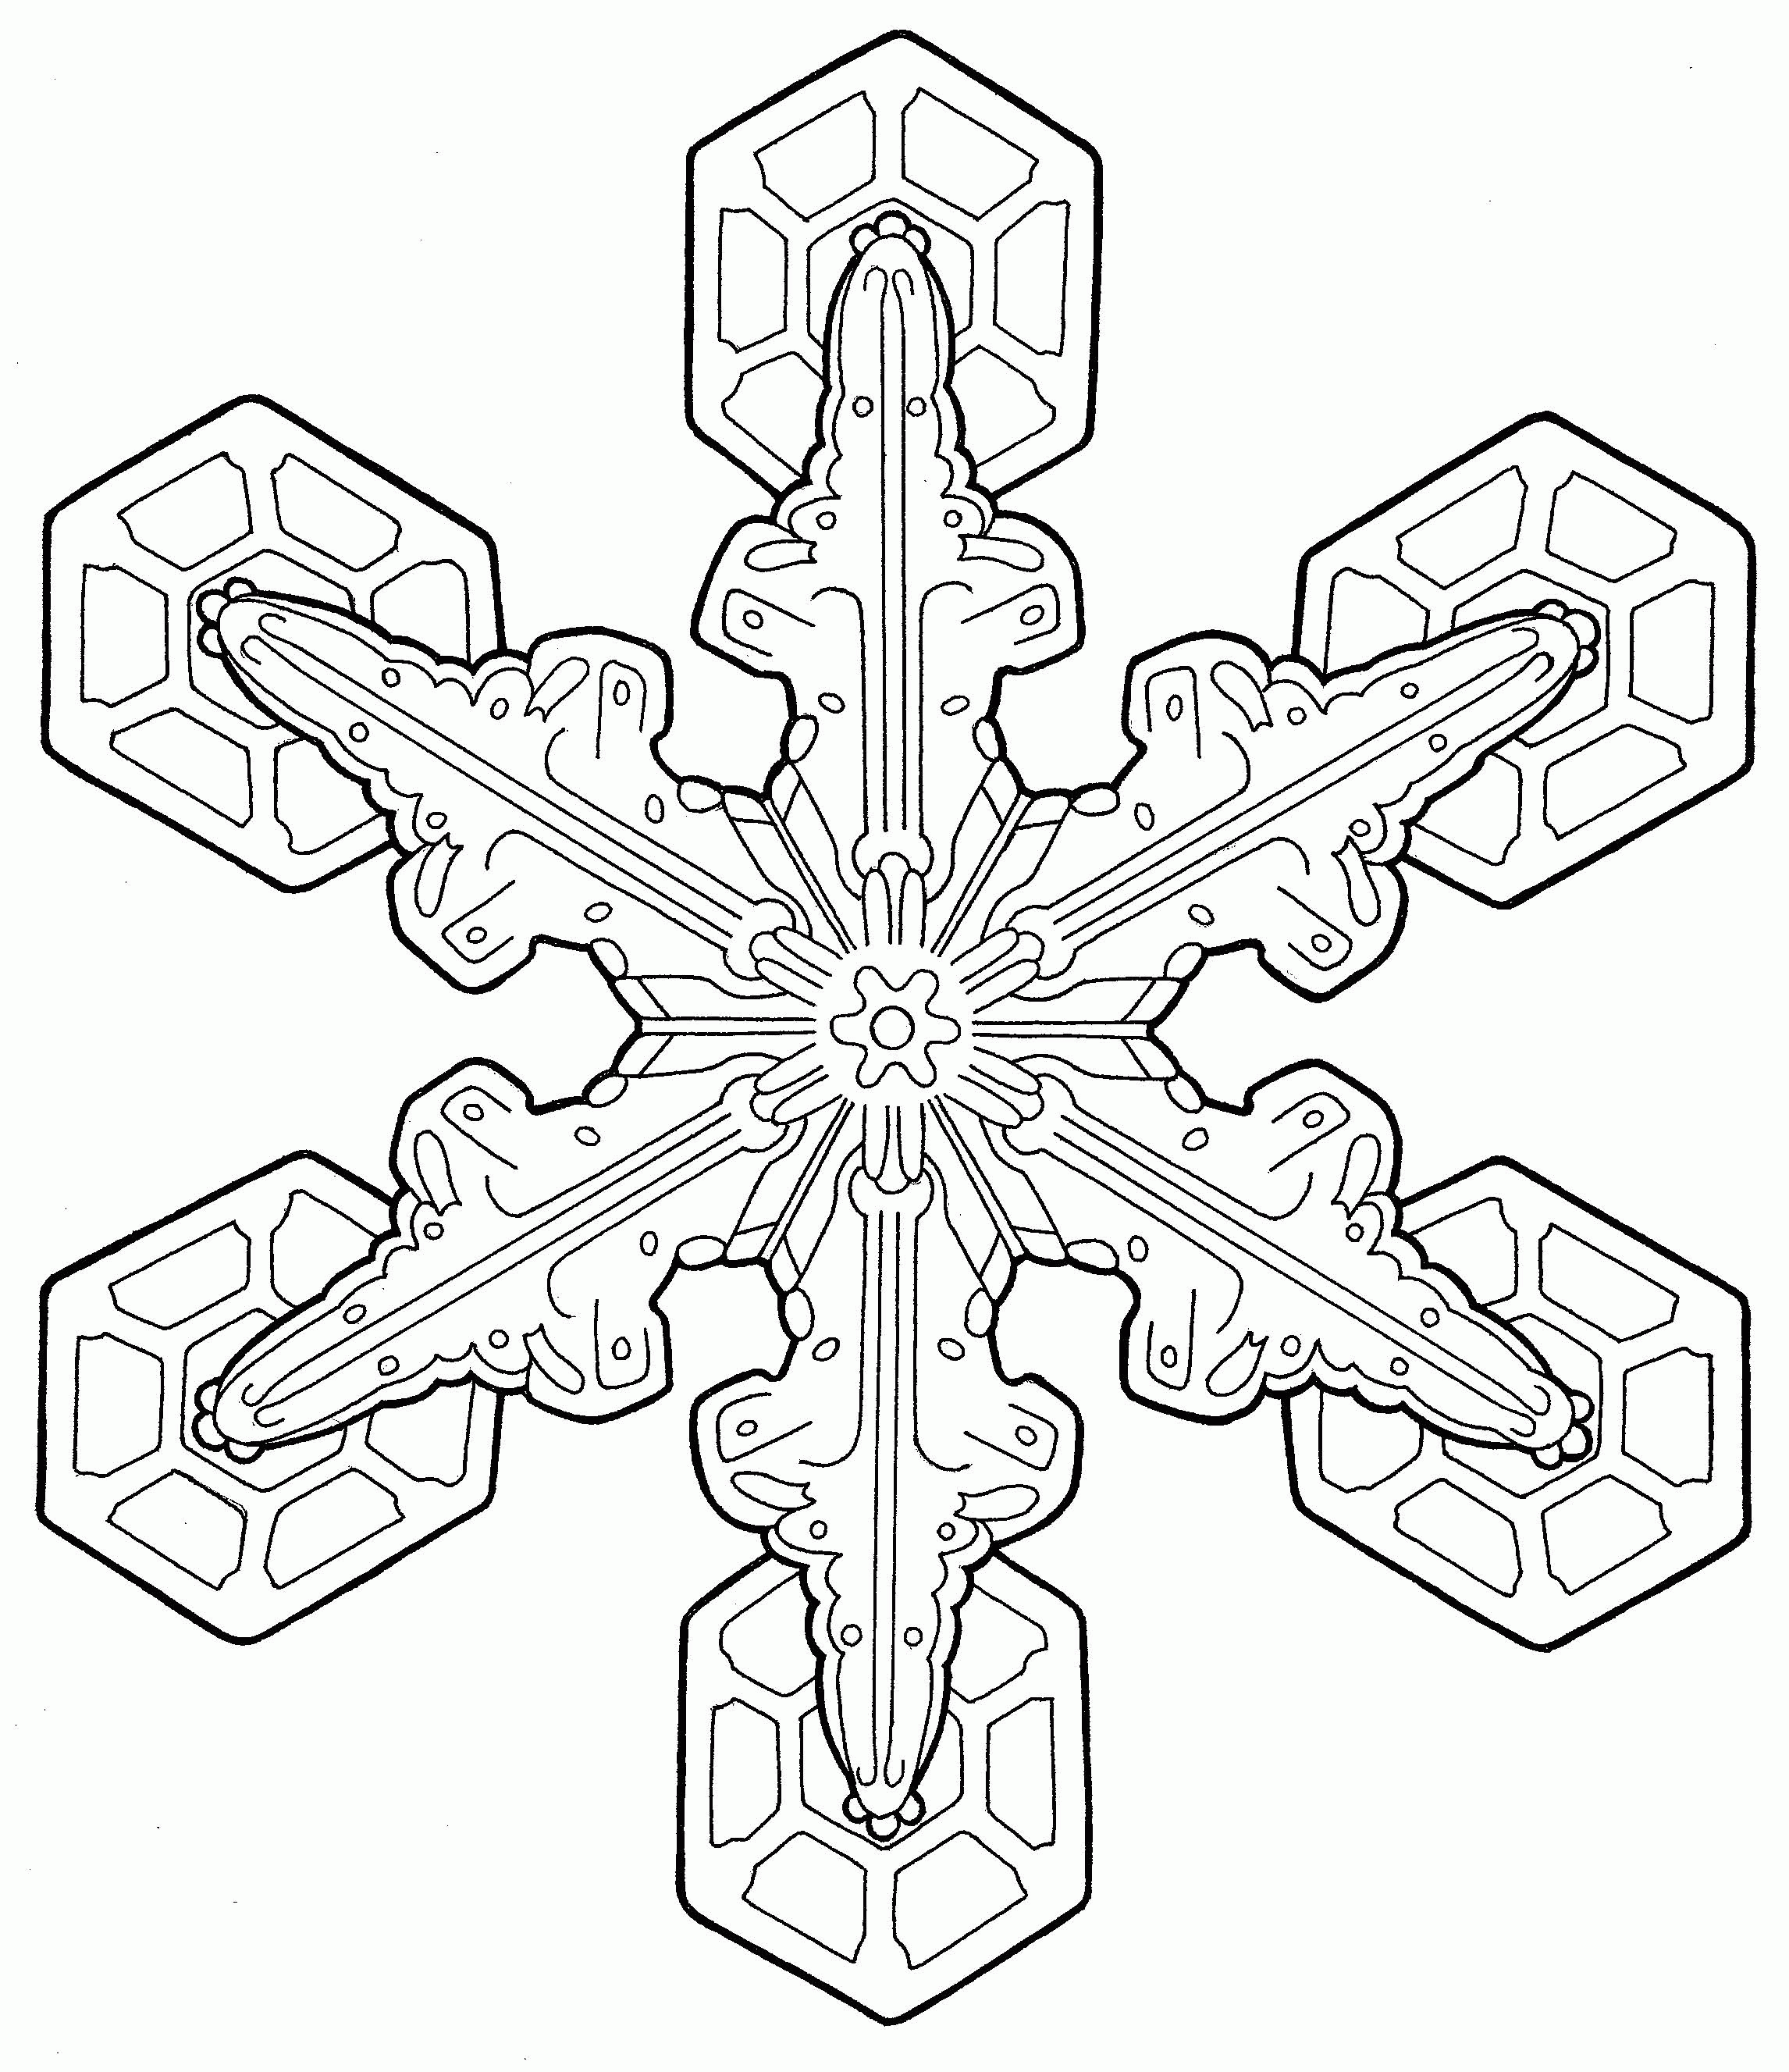 Adult Coloring Pages To Print - Coloring Home